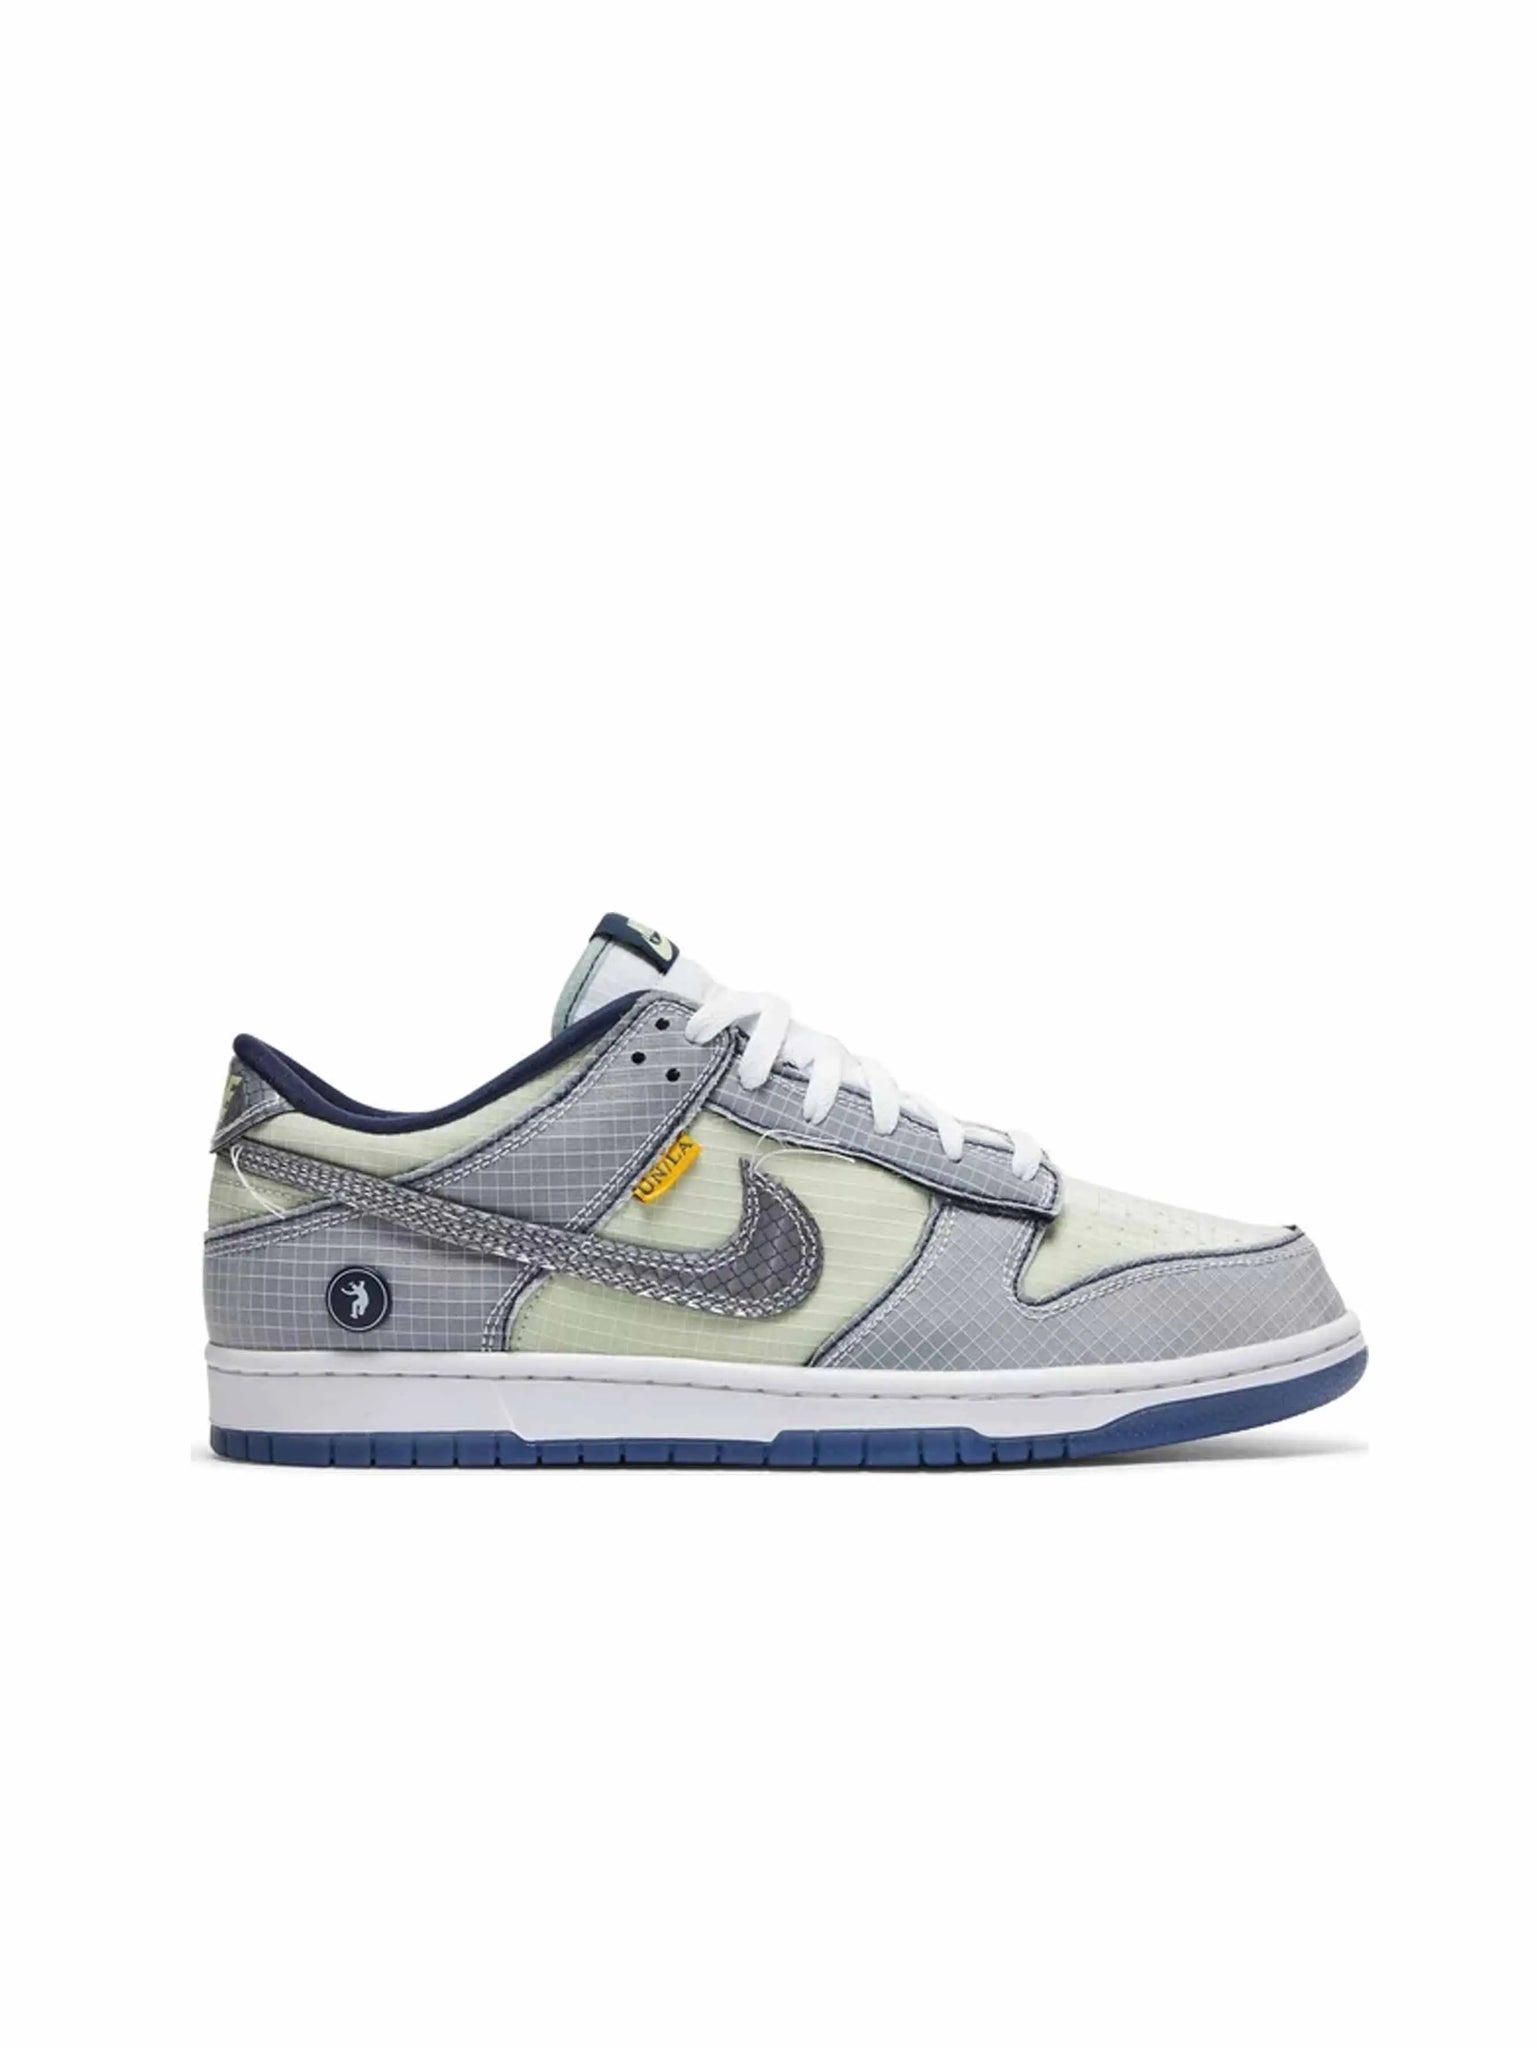 Nike Dunk Low Union Passport Pack Pistachio in Auckland, New Zealand - Shop name